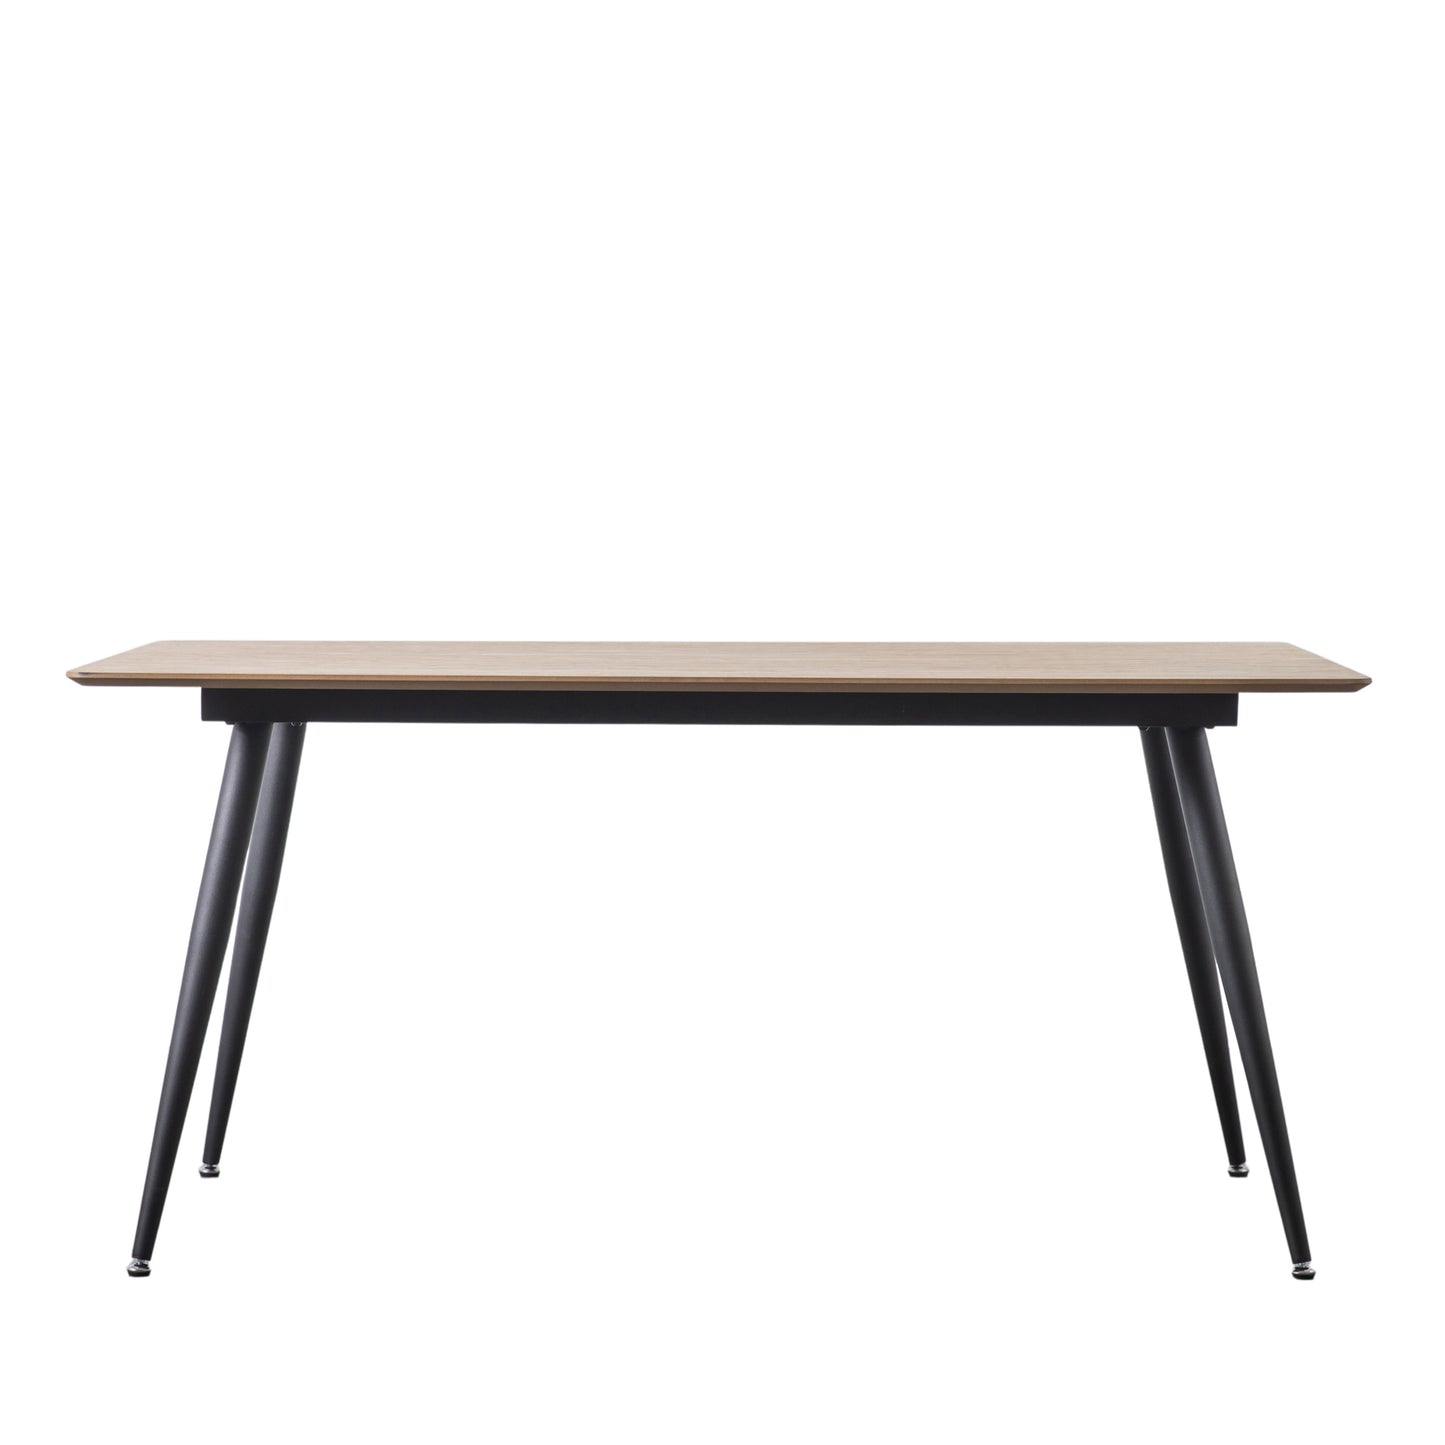 A chic Ashford Dining Table with black legs and a wooden top, perfect for interior decor and home furniture.